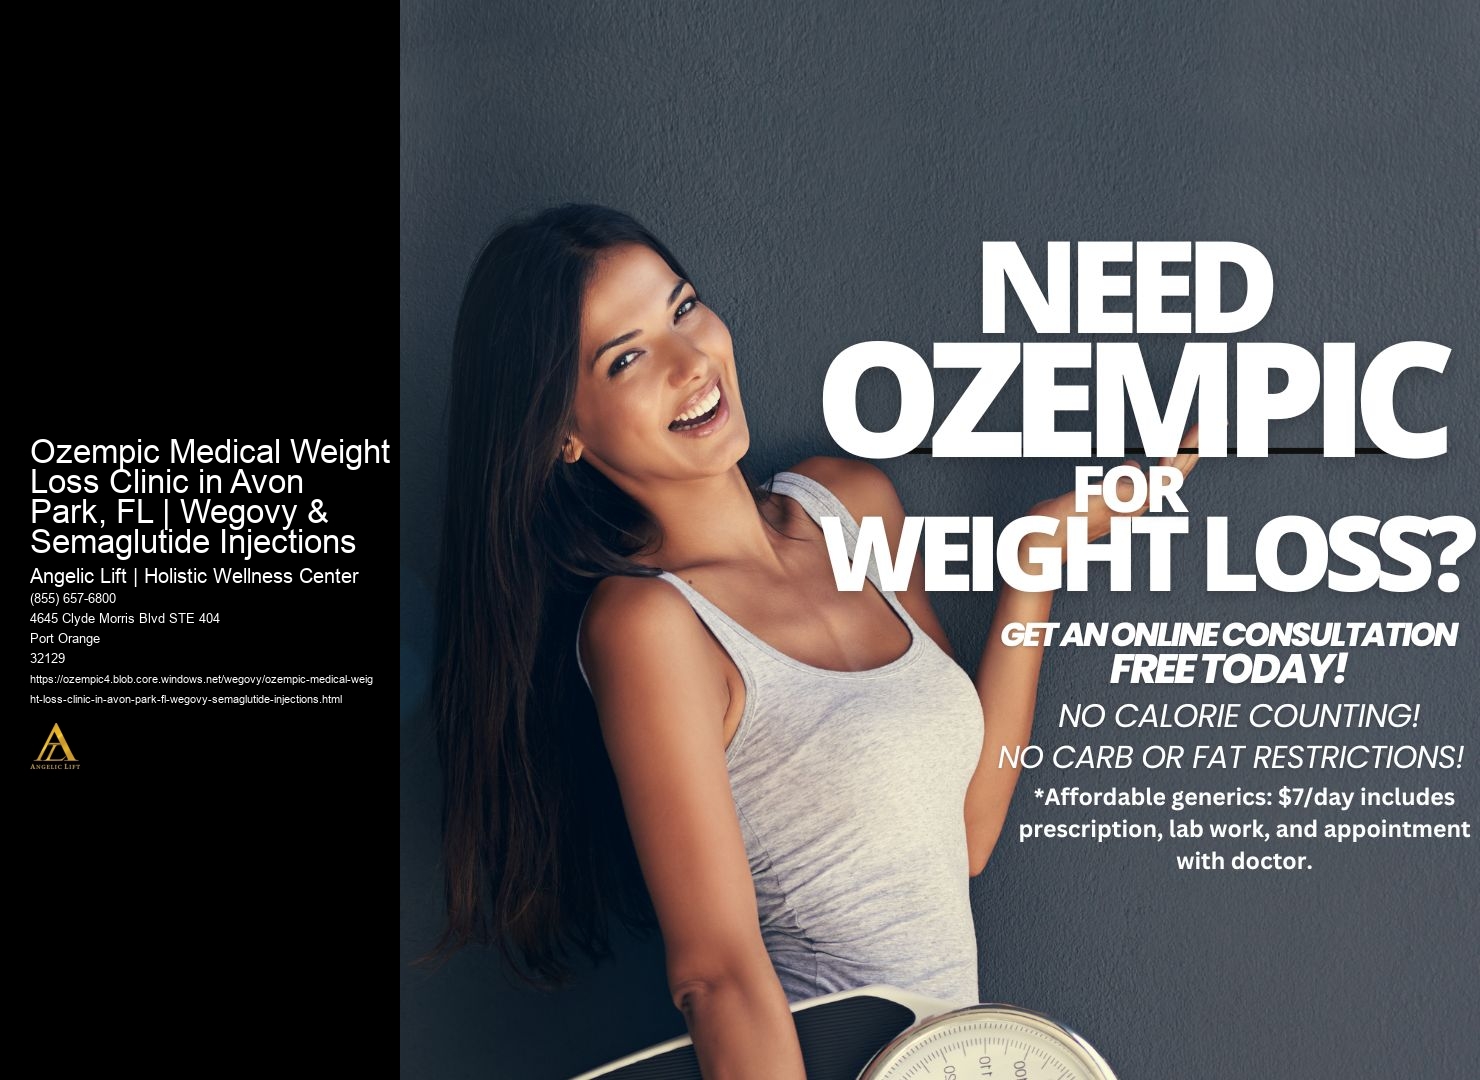 Ozempic Medical Weight Loss Clinic in Avon Park, FL | Wegovy & Semaglutide Injections